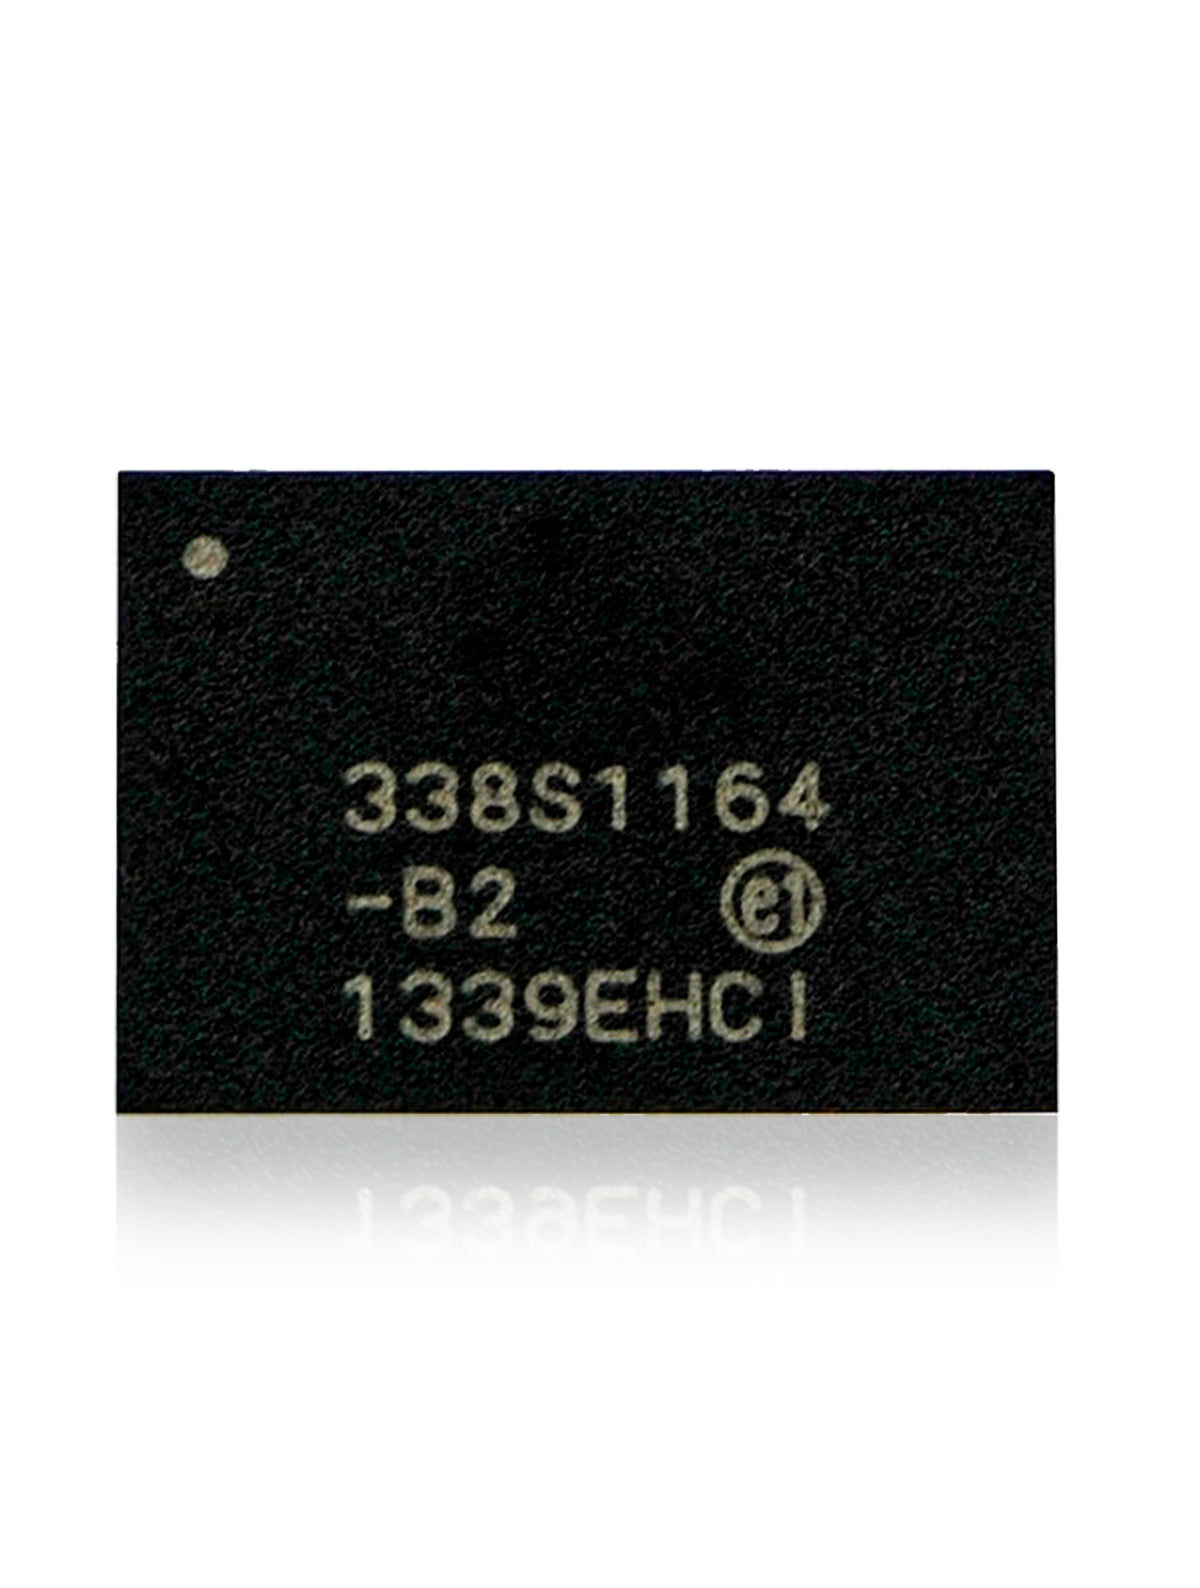 POWER MANAGEMENT IC (BIG) COMPATIBLE WITH IPHONE 5C (338S1164-B2)